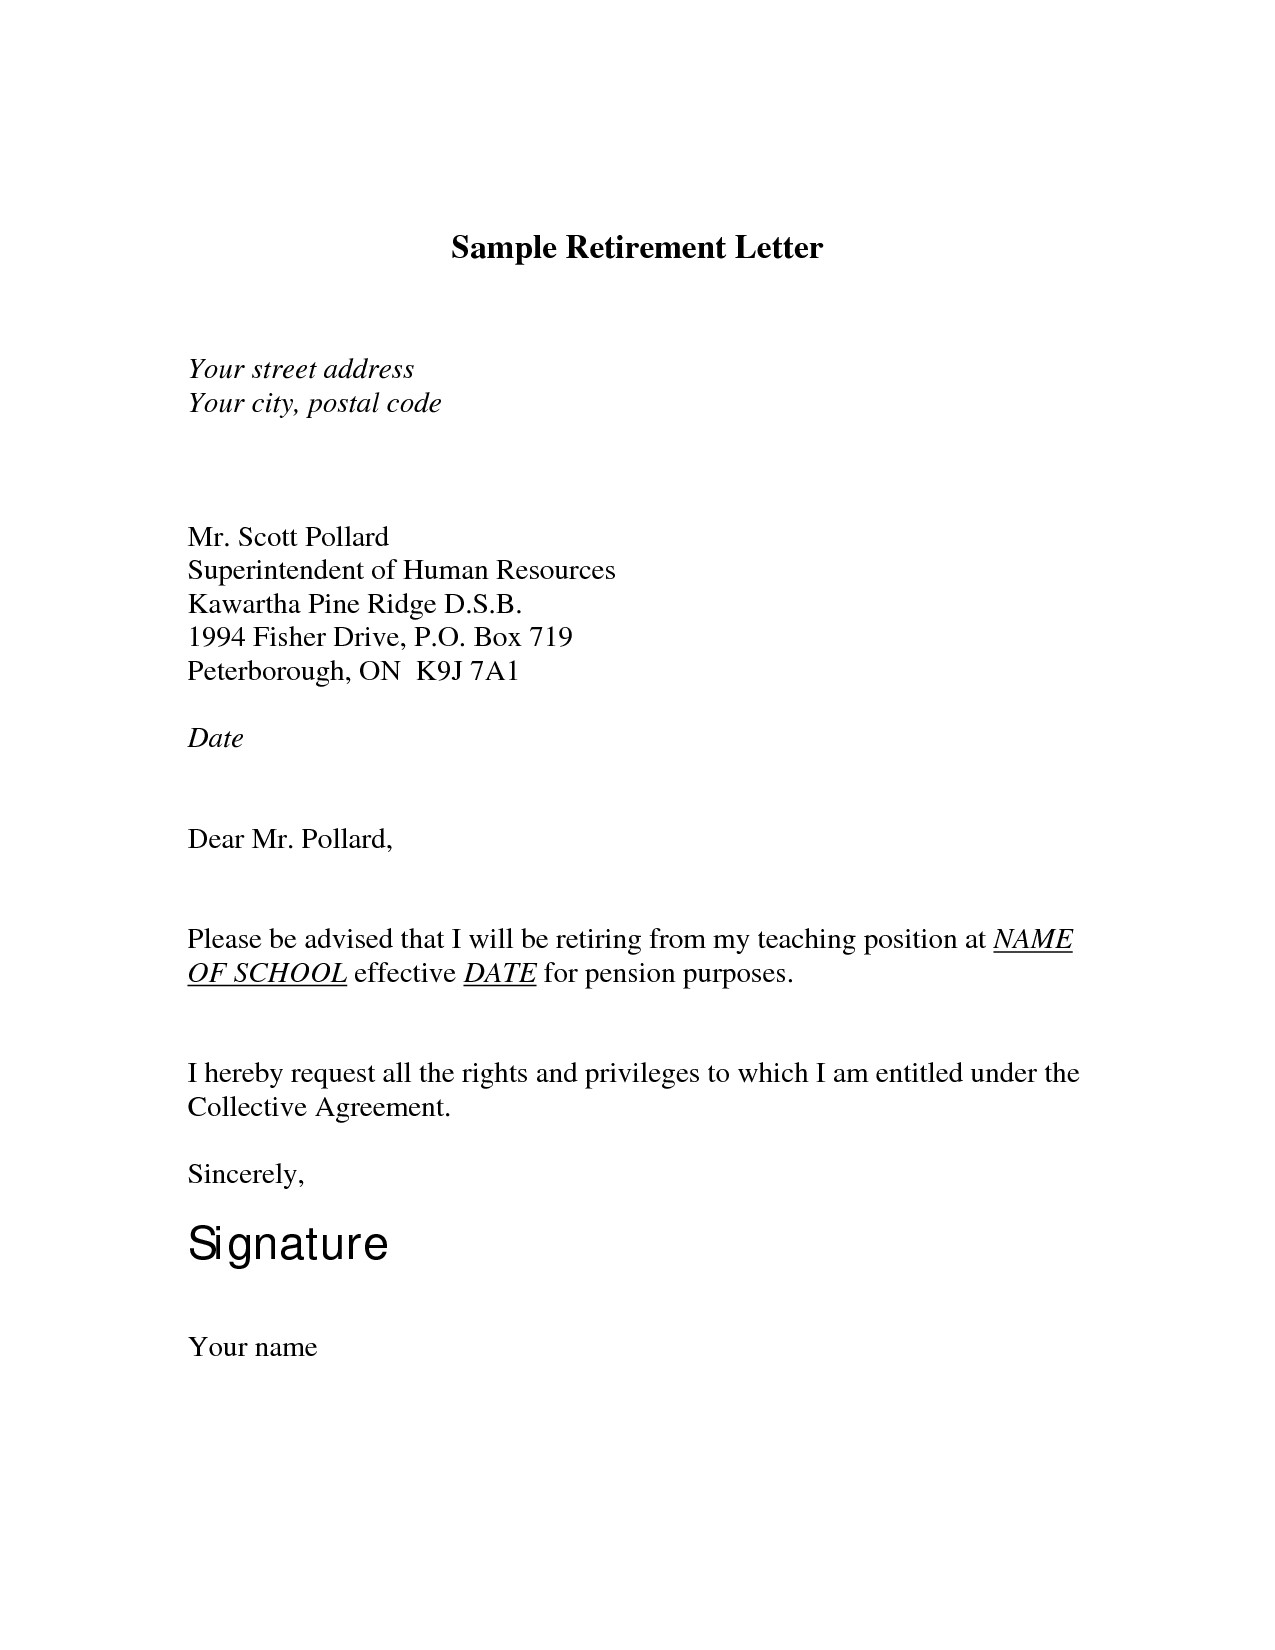 Retirement Letter to Employer Template - Best format Retirement Letter From Employer Fresh Retirement